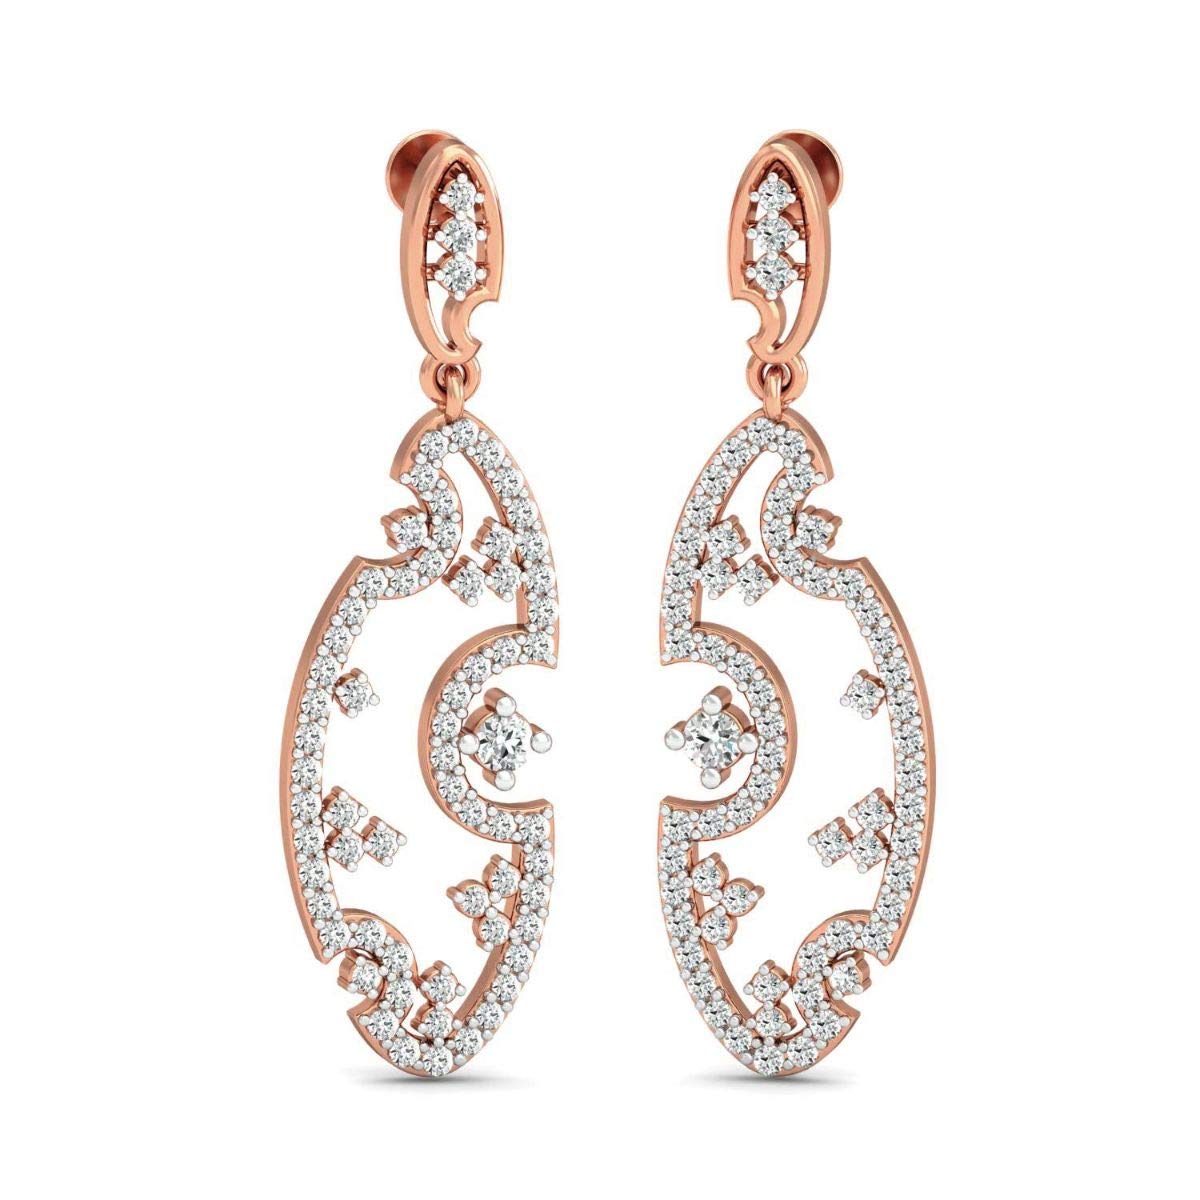 1.55 Ctw Natural Diamond With 18K White/Yellow/Rose Gold Antique Design Drop Style Earrings With VVS Certificate, Earrings Sets, Diamond Earrings, Huggie Earrings